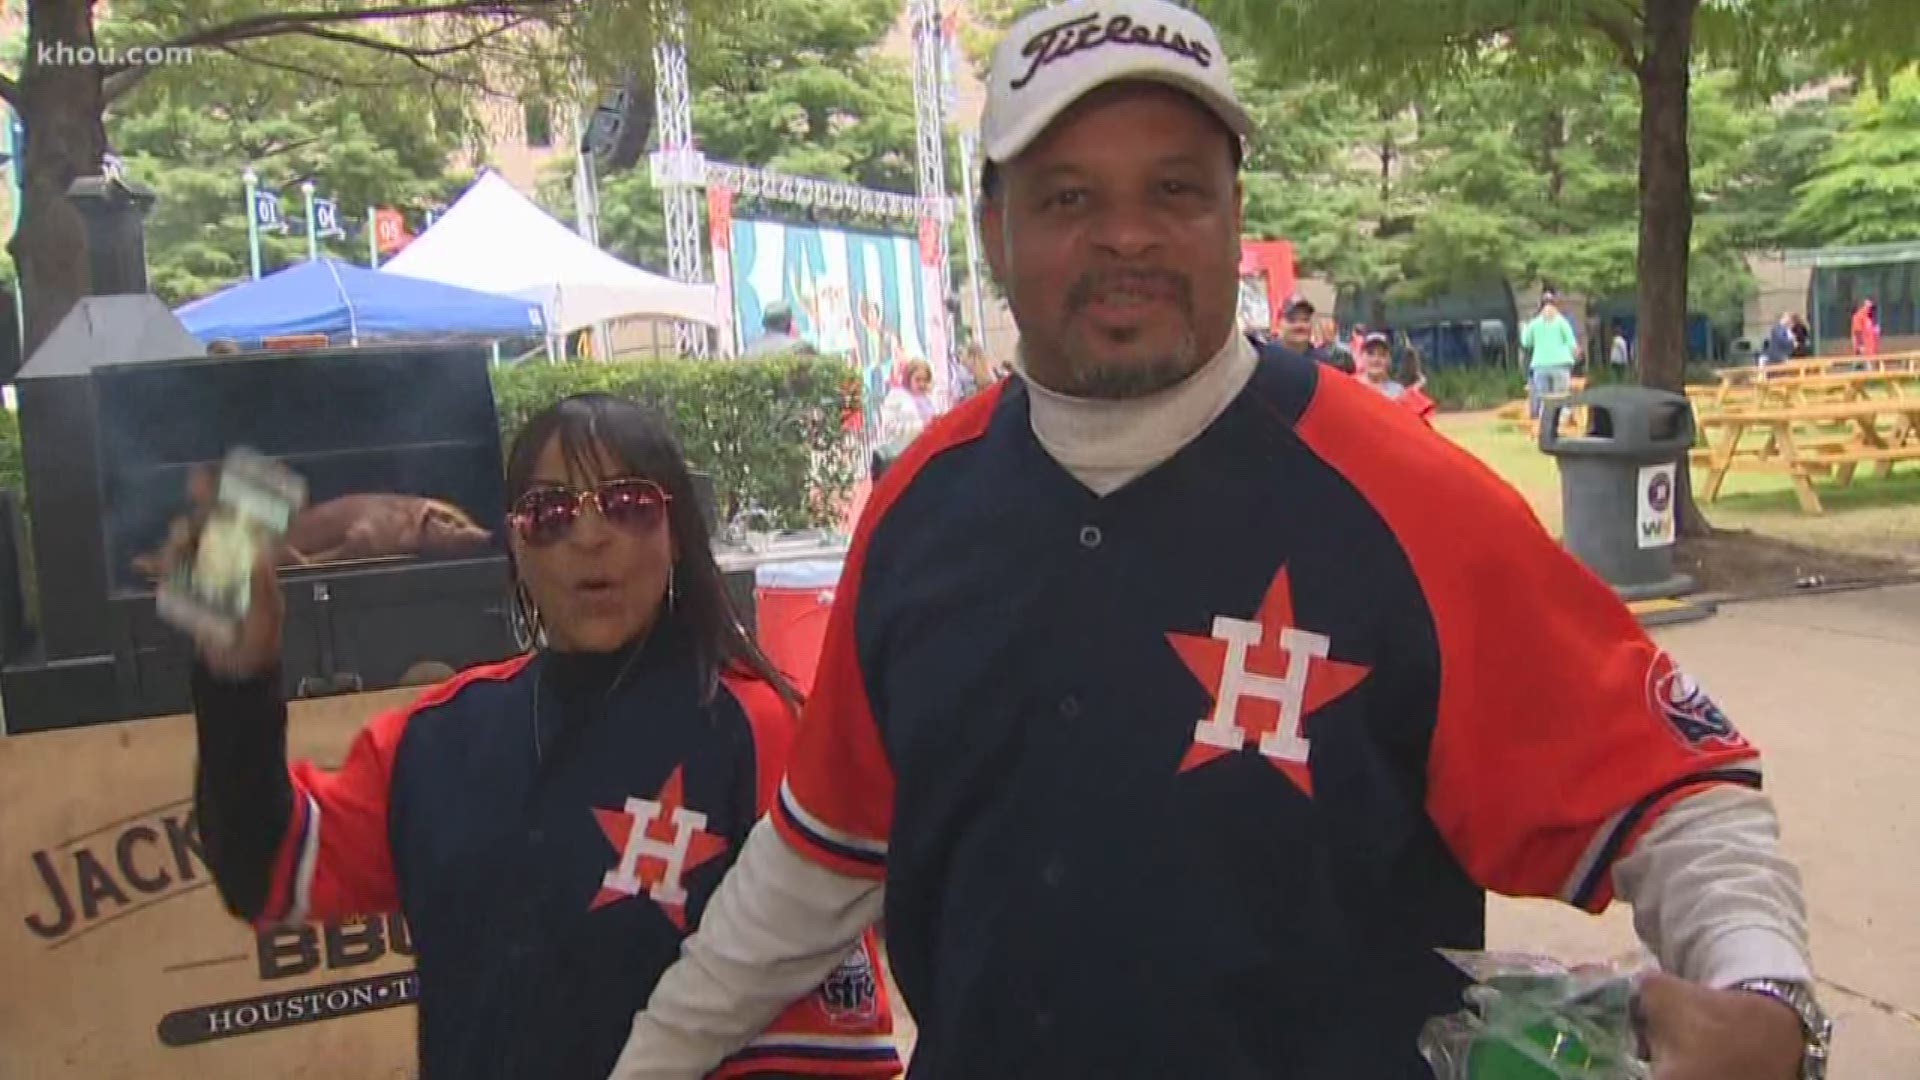 Astros fans are optimistic for a Game 7 win.